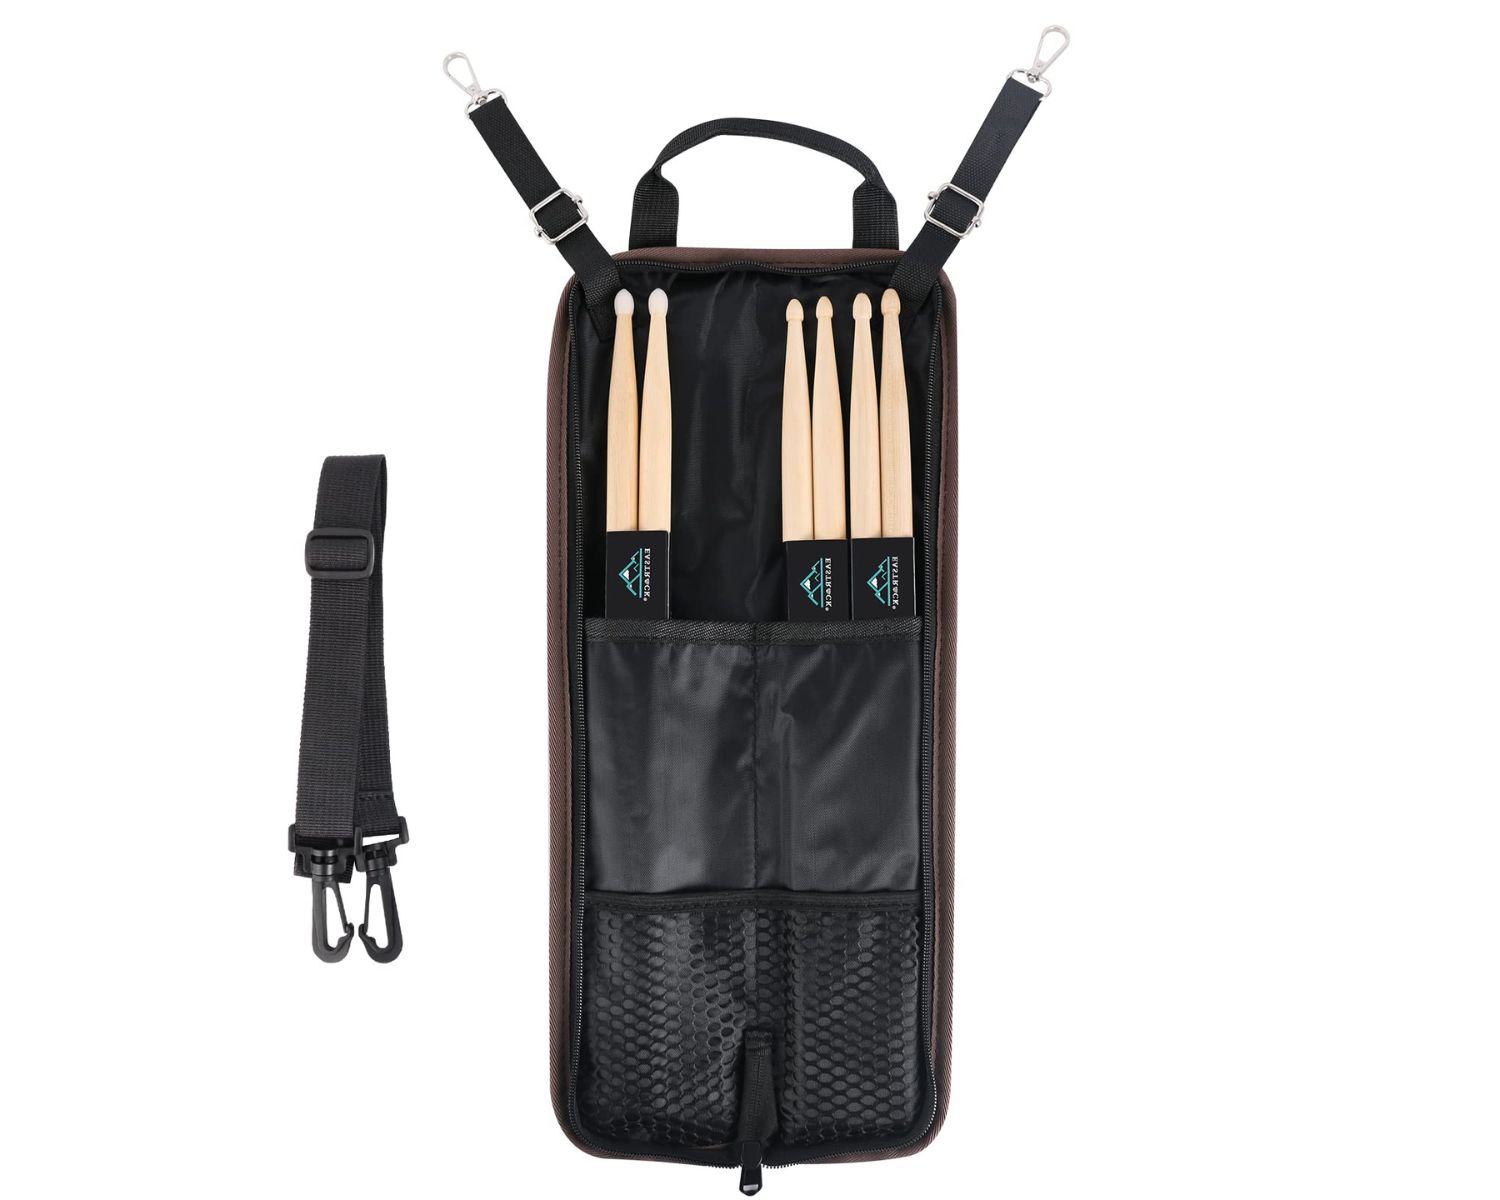 Drum Stick Bag Review: A Must-Have for Him